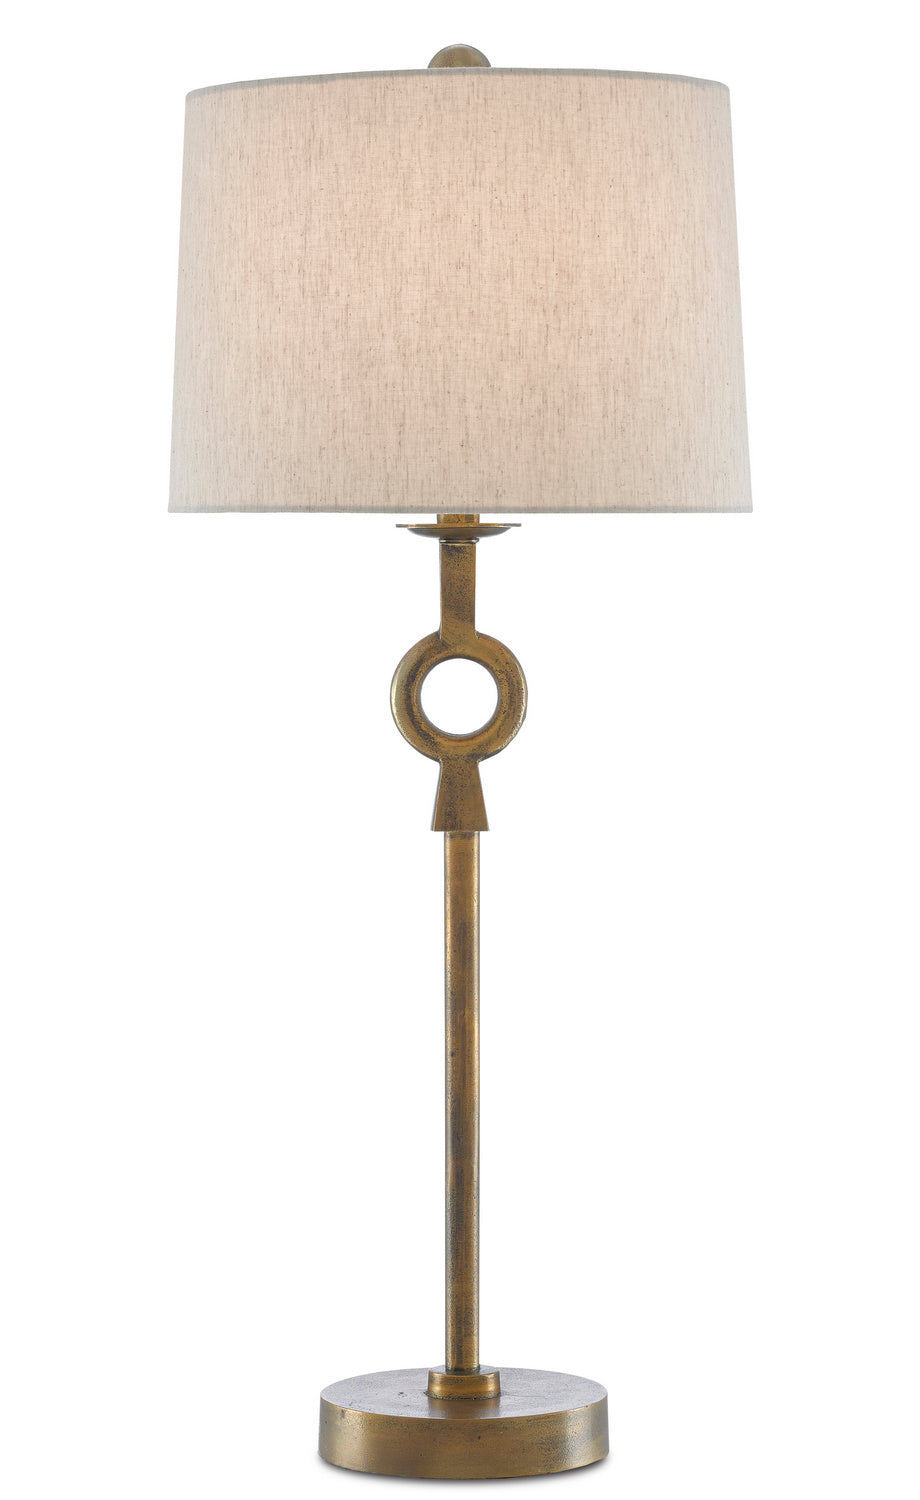 One Light Table Lamp from the Germaine collection in Antique Brass finish